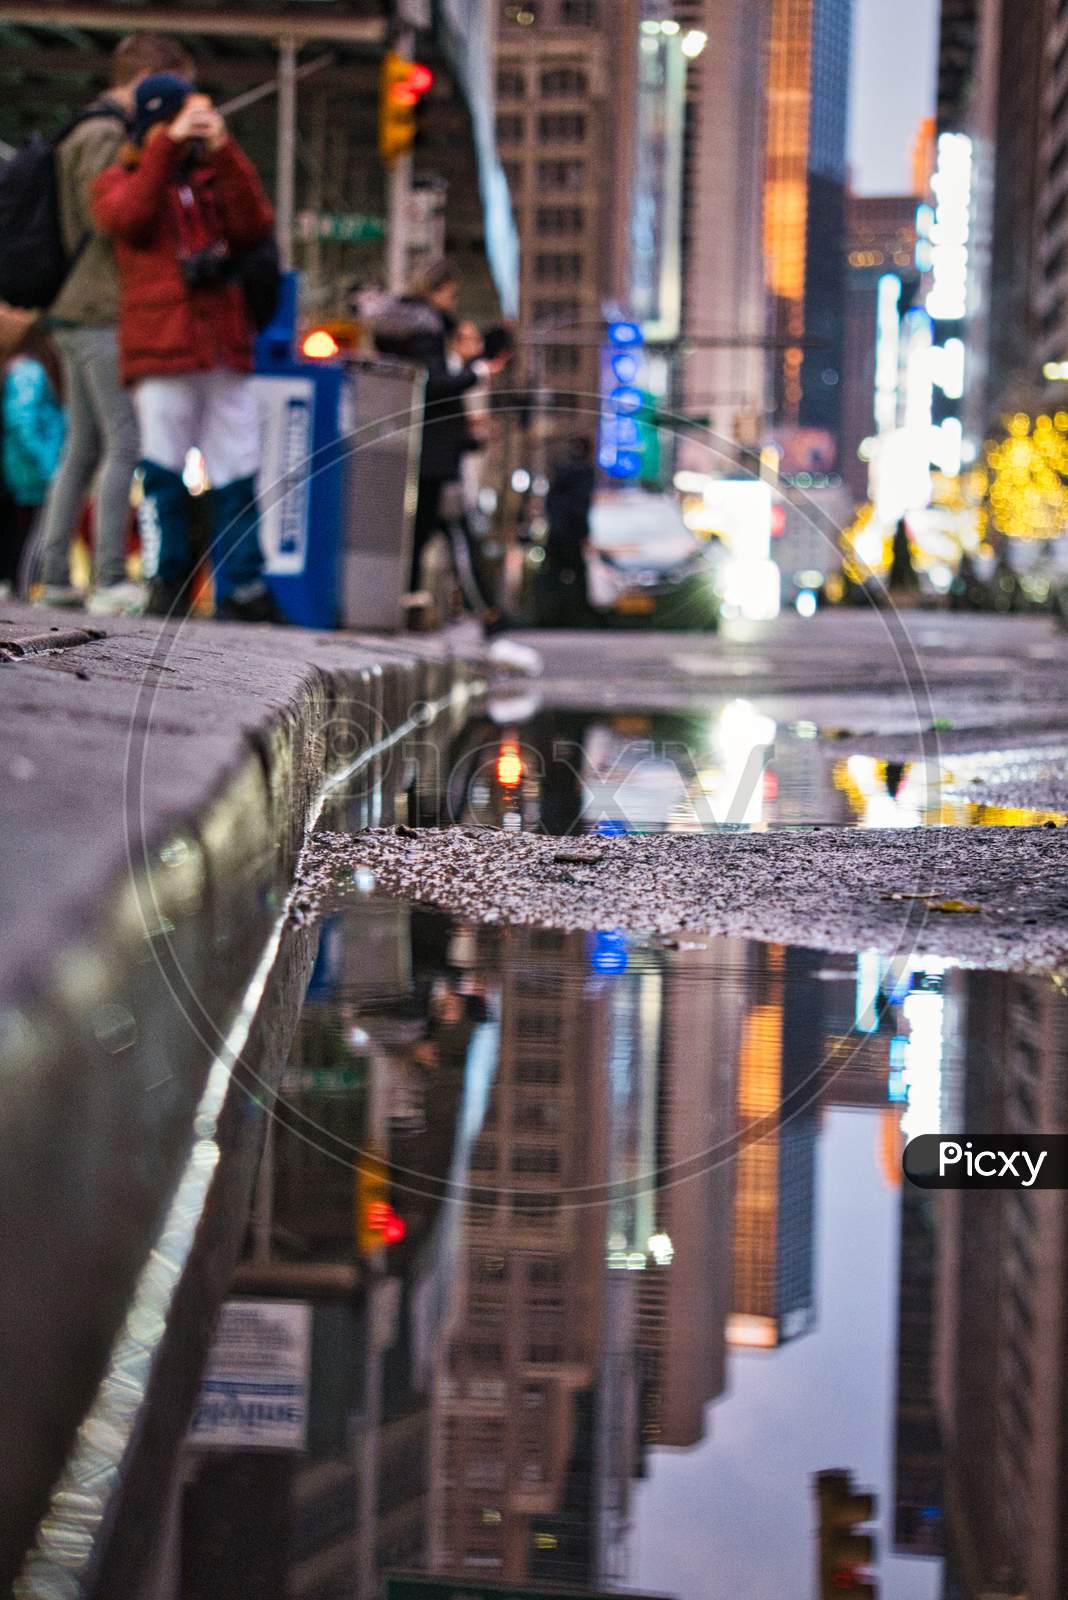 City lights reflecting in the water puddle by the side of the road